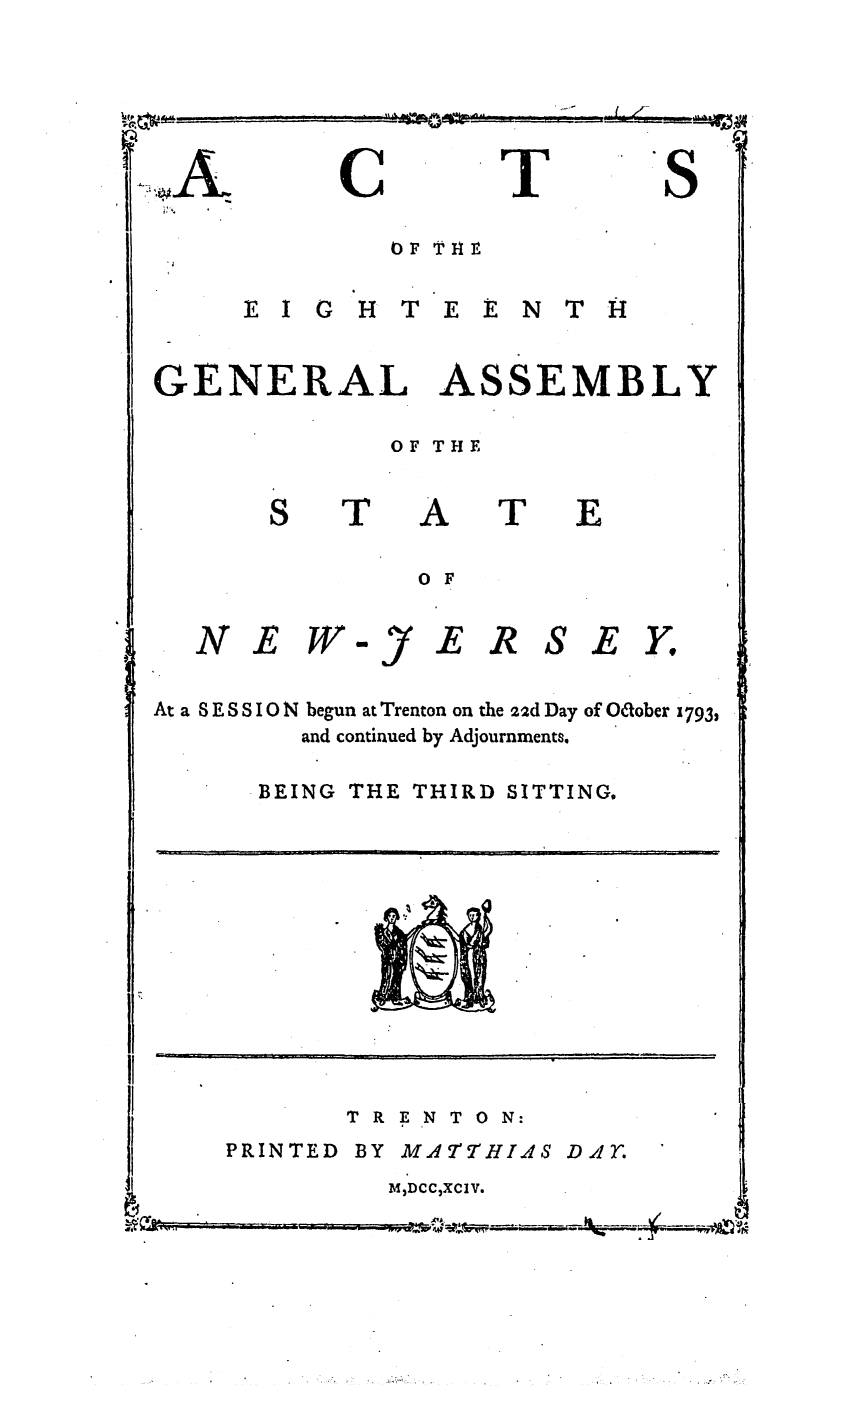 handle is hein.ssl/ssnj0258 and id is 1 raw text is: C

T

EI G HTEENTITH

GENERAL

ASSEMBLY

OF THE

T

A
0 F

T

E

NEW

-y

EIR SEY.

At a 8 E S S IO N begun at Trenton on the 22d Day of Odober 1793,
and continued by Adjournments.

BEING THE

THIRD SITTING.

TRENTON:

PRINTED

BY MA7THIAS Didr'

MDCCXCIV.

A:,

8

D               ml       illl                                     [                                 j                            n   [        n     i   i              I

.            .  ..     L              !  [     m  1  I  ]l [


